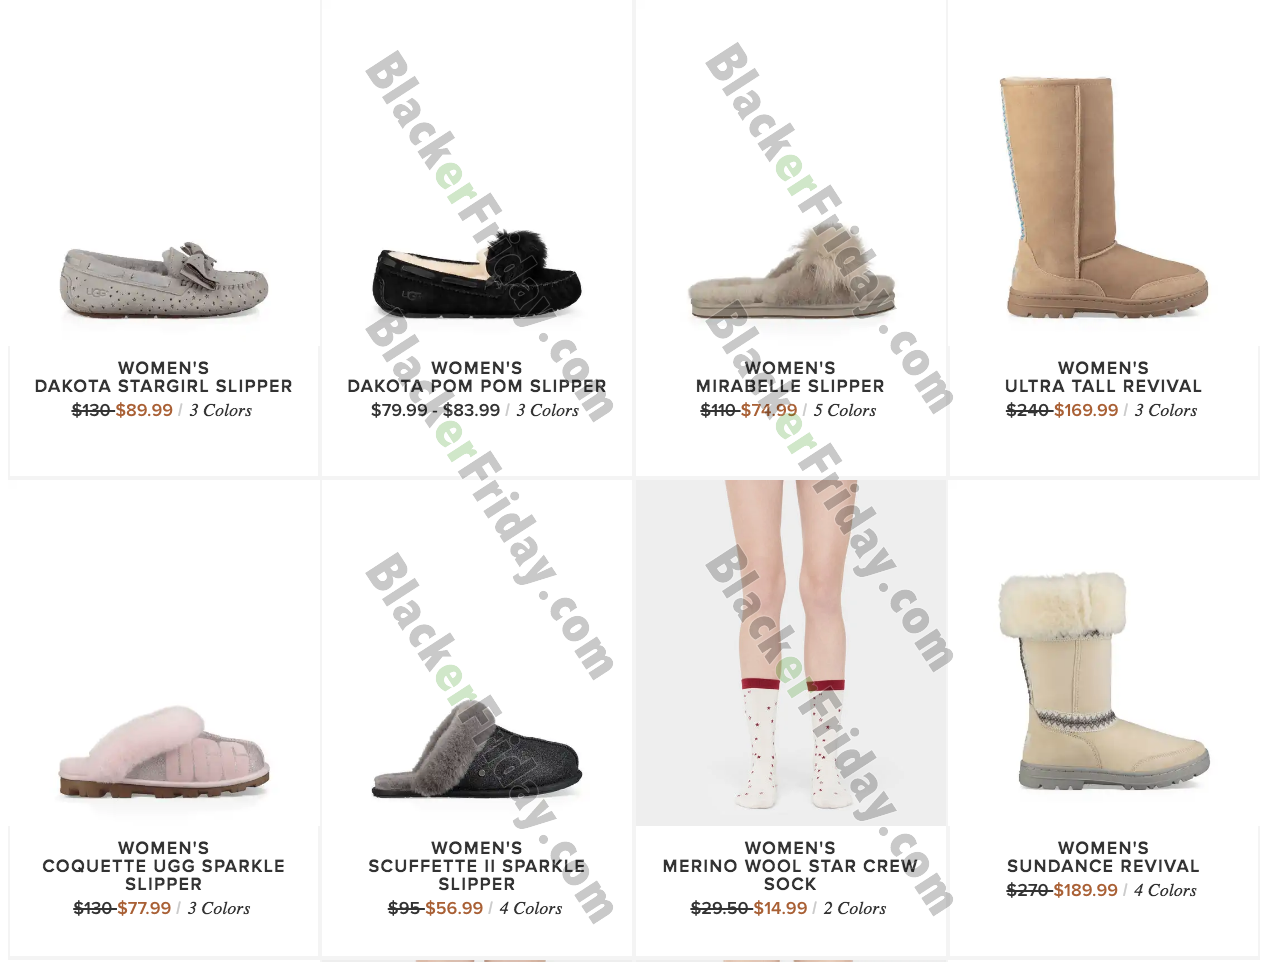 UGG After Christmas Sale 2020 - What to 